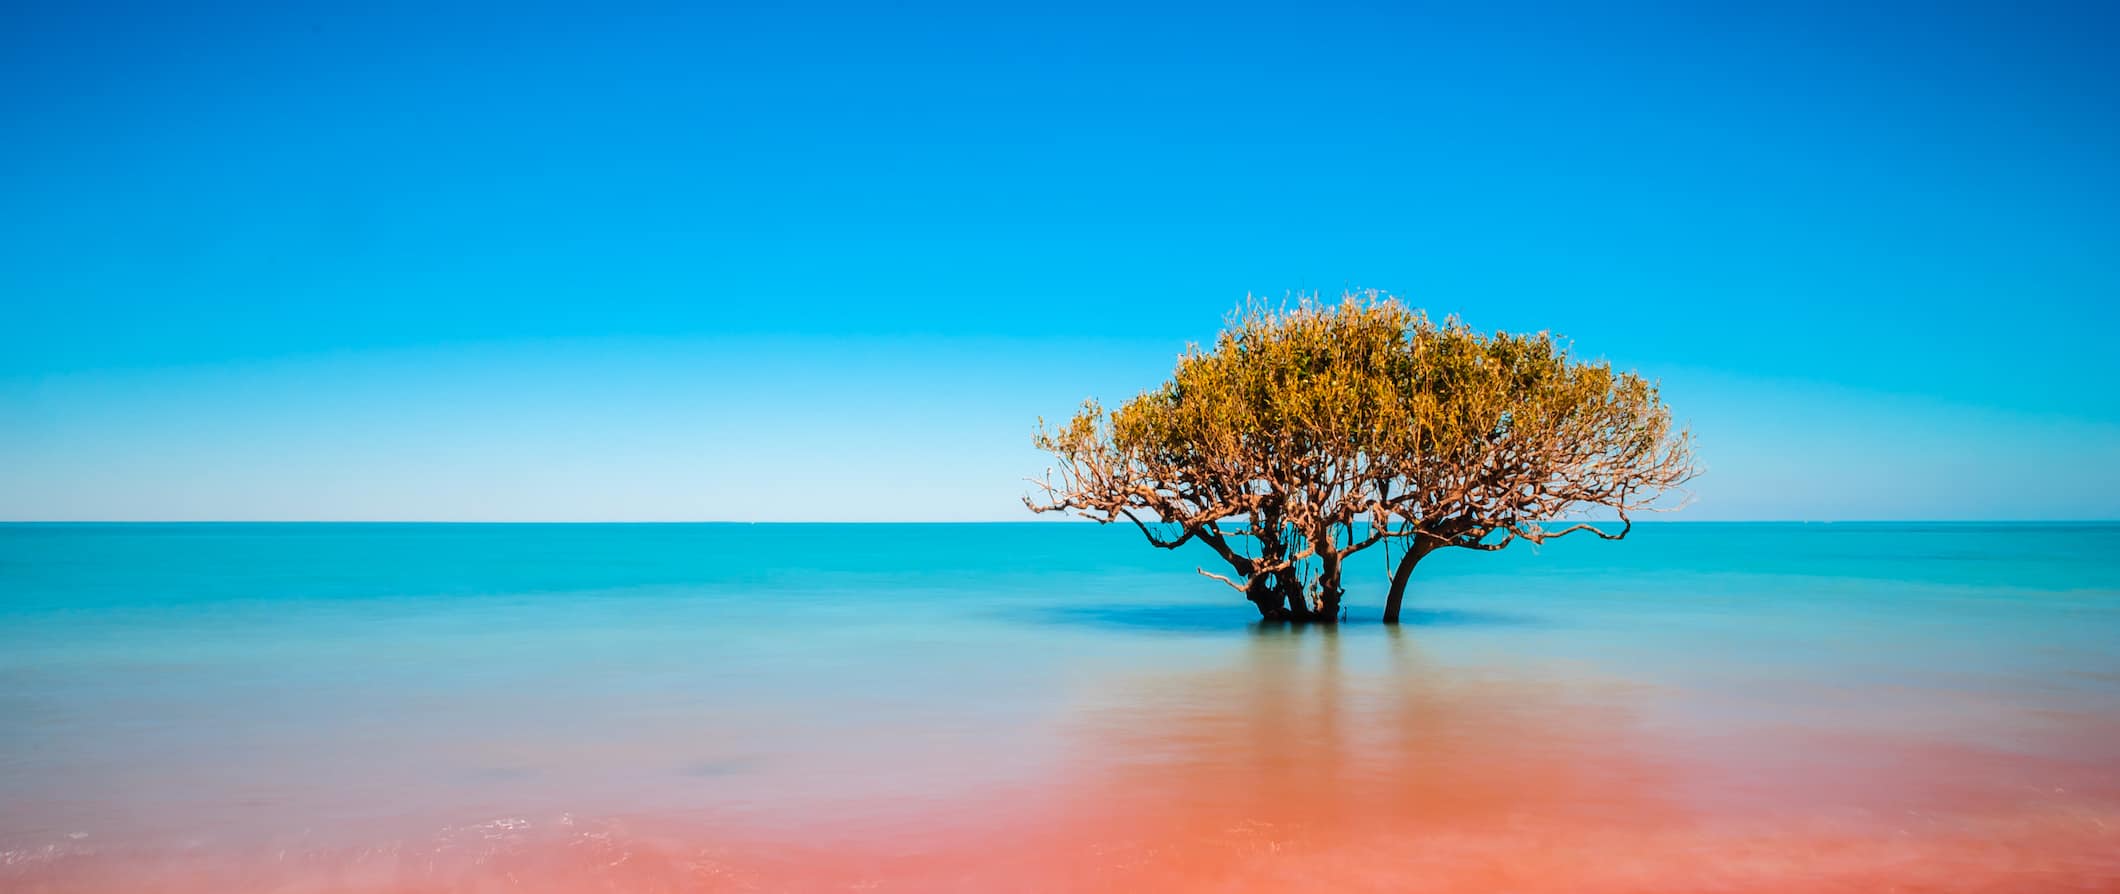 A lone tree in the mix of muddy waters on the coast of Broome, Australia